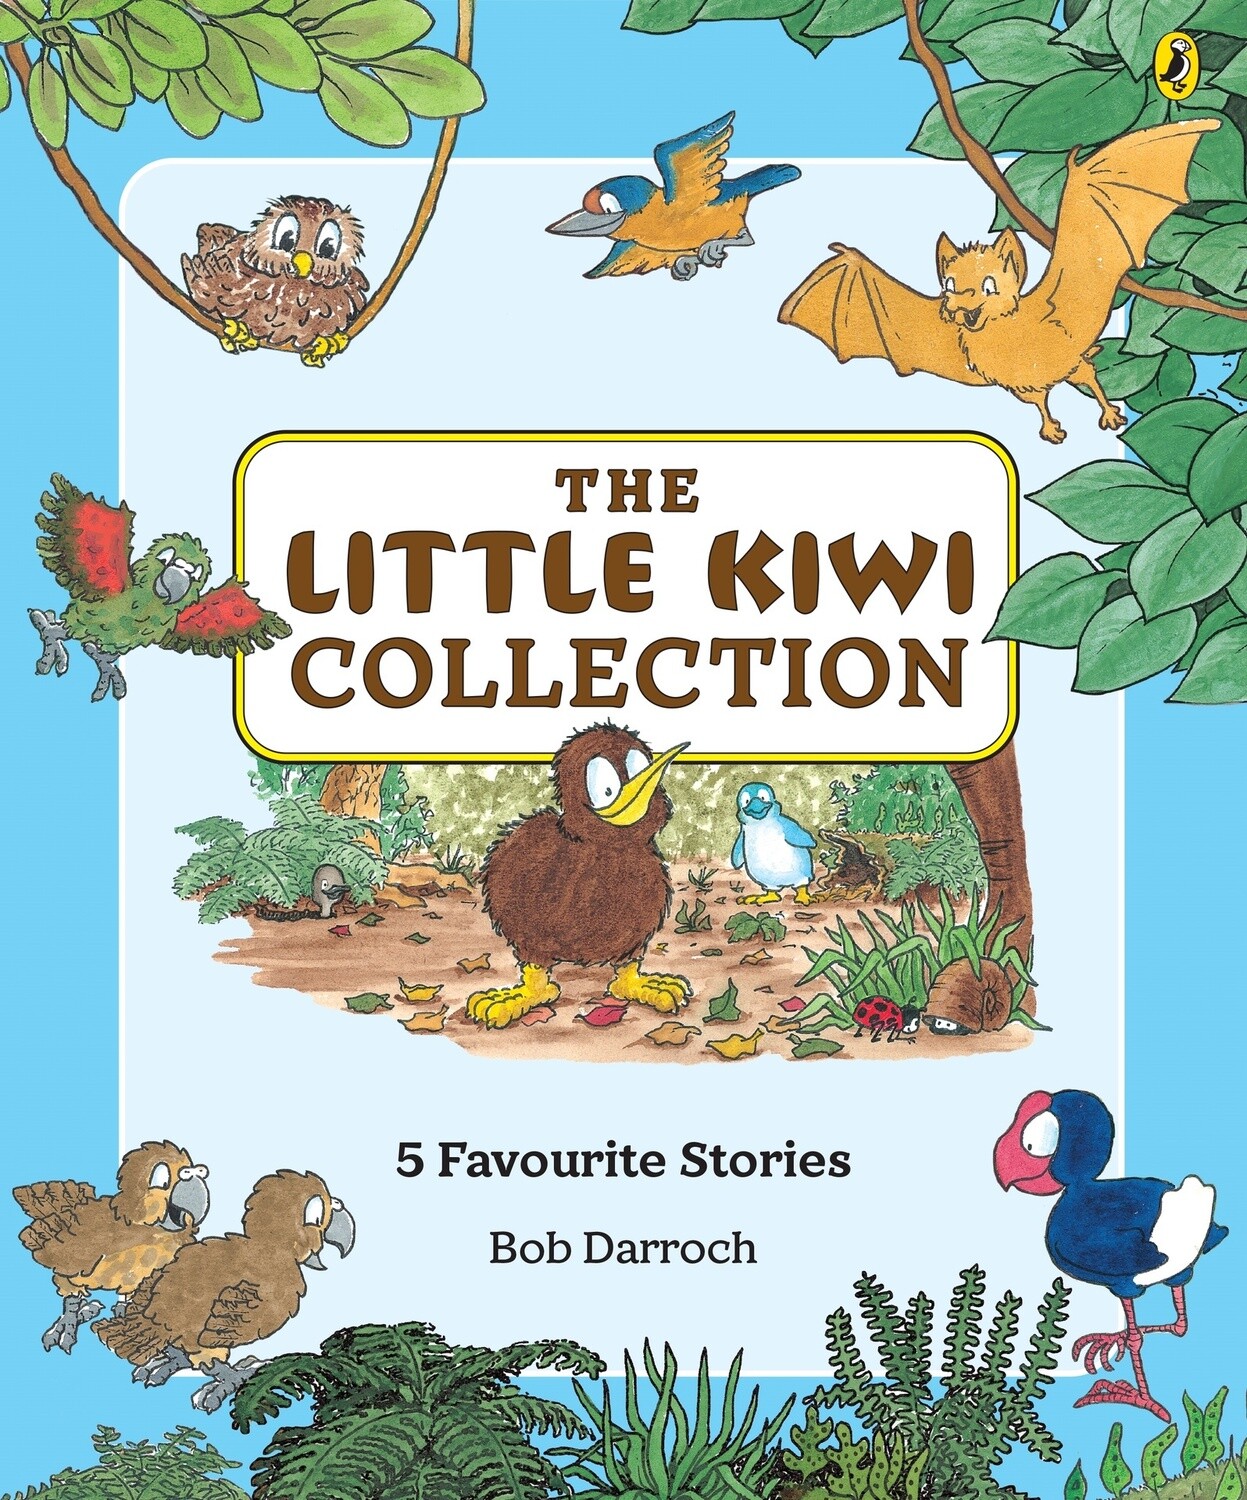 The Little Kiwi Collection: 5 Favourite Stories by Bob Darroch